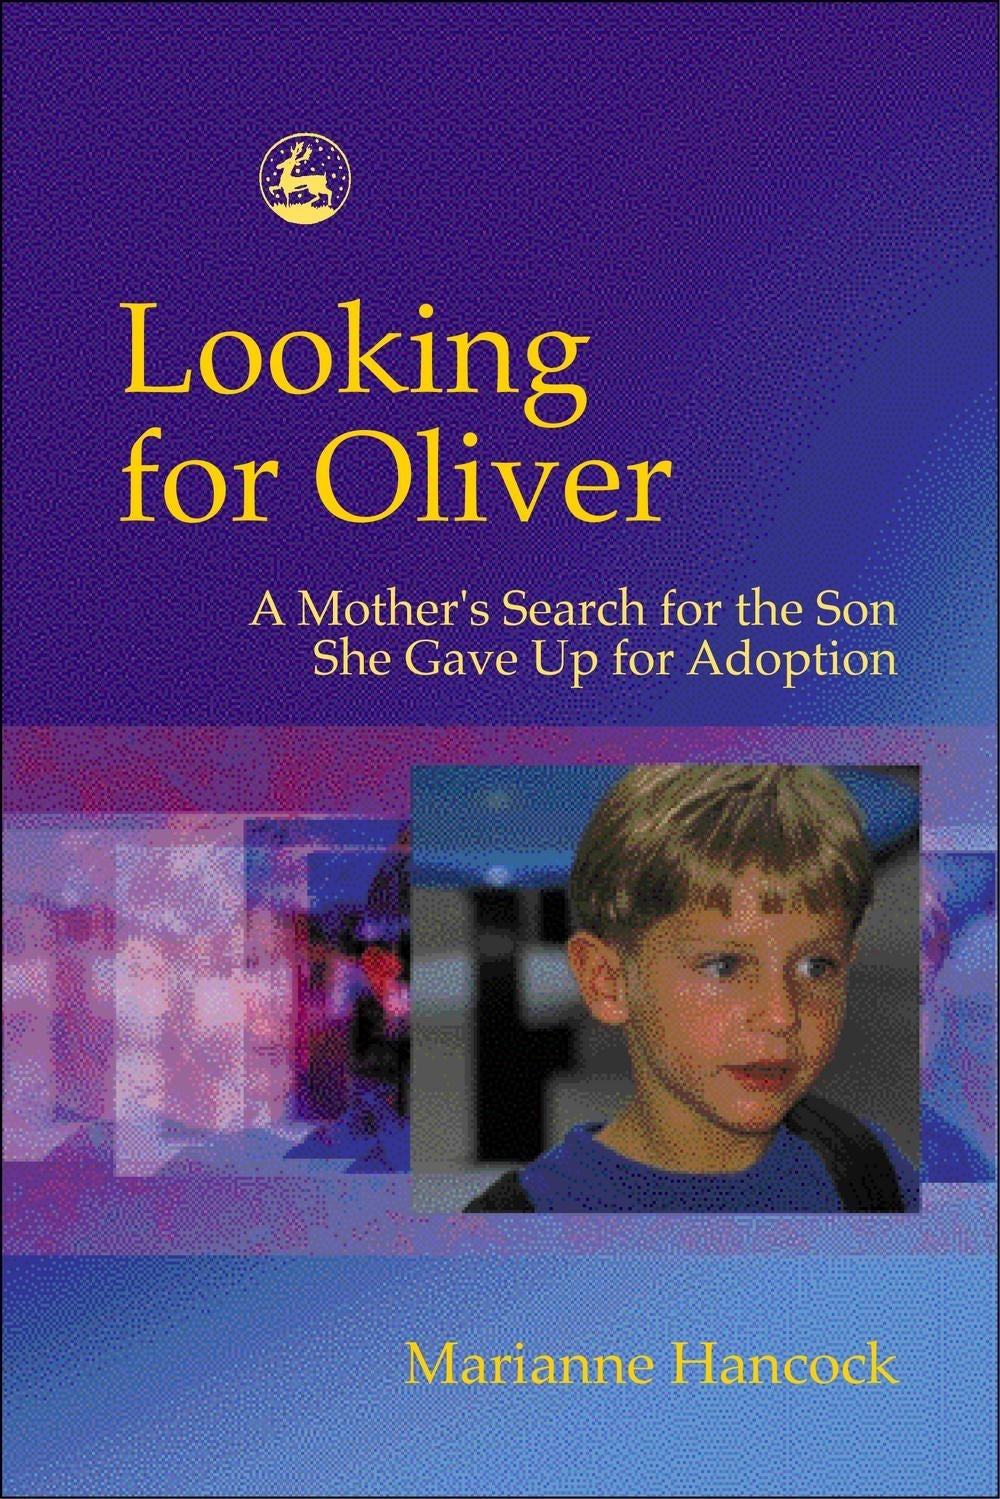 Looking for Oliver by Marianne Hancock